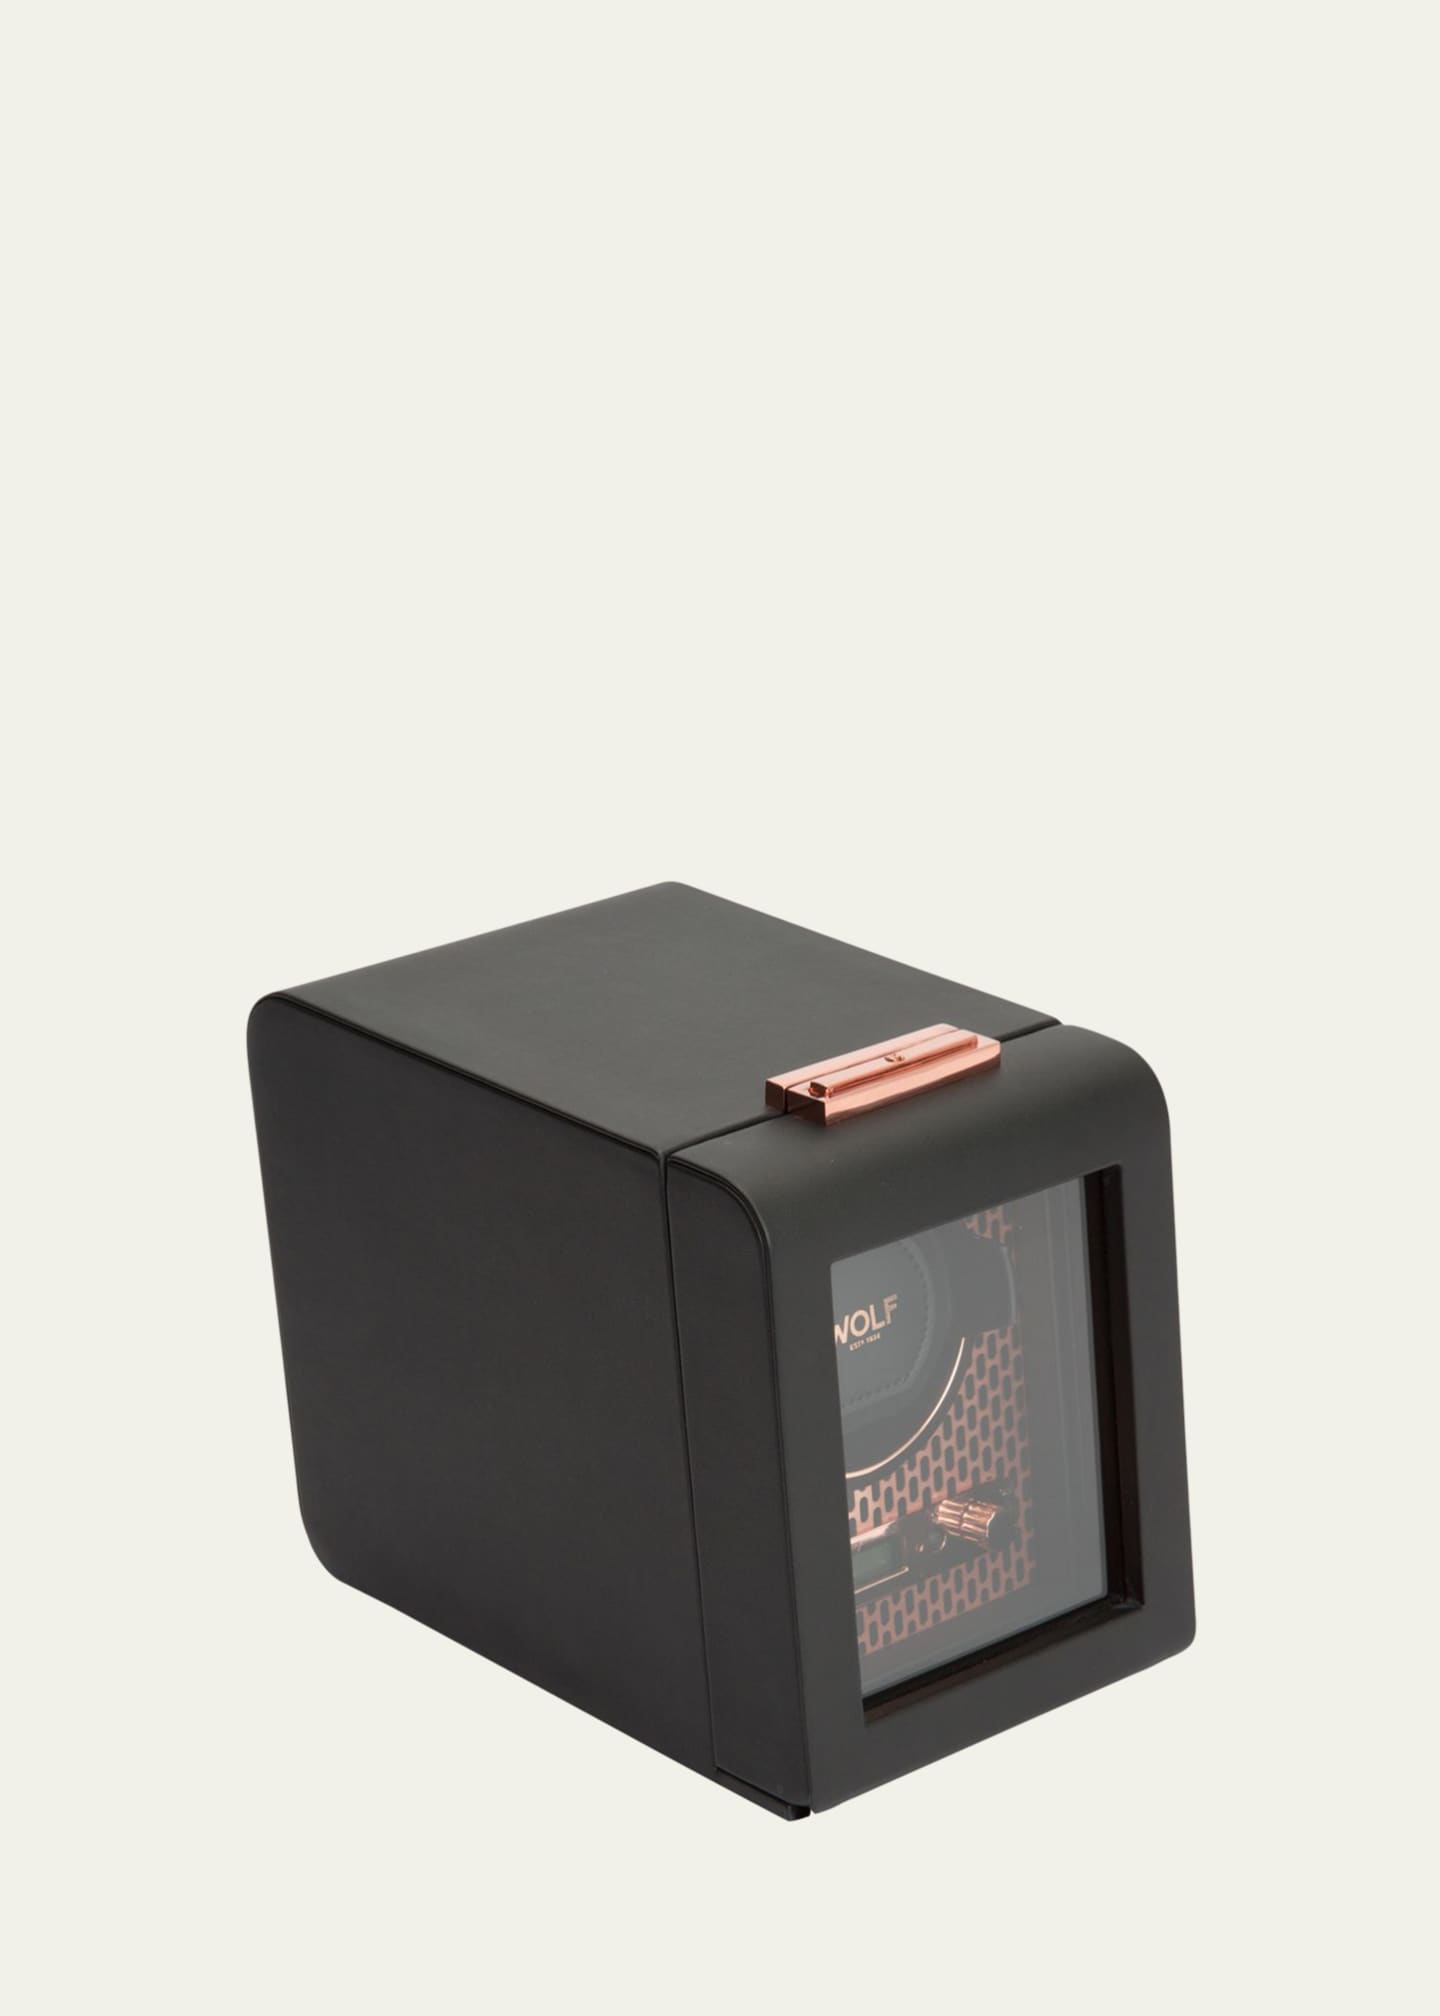 WOLF Axis Single Watch Winder Image 1 of 3